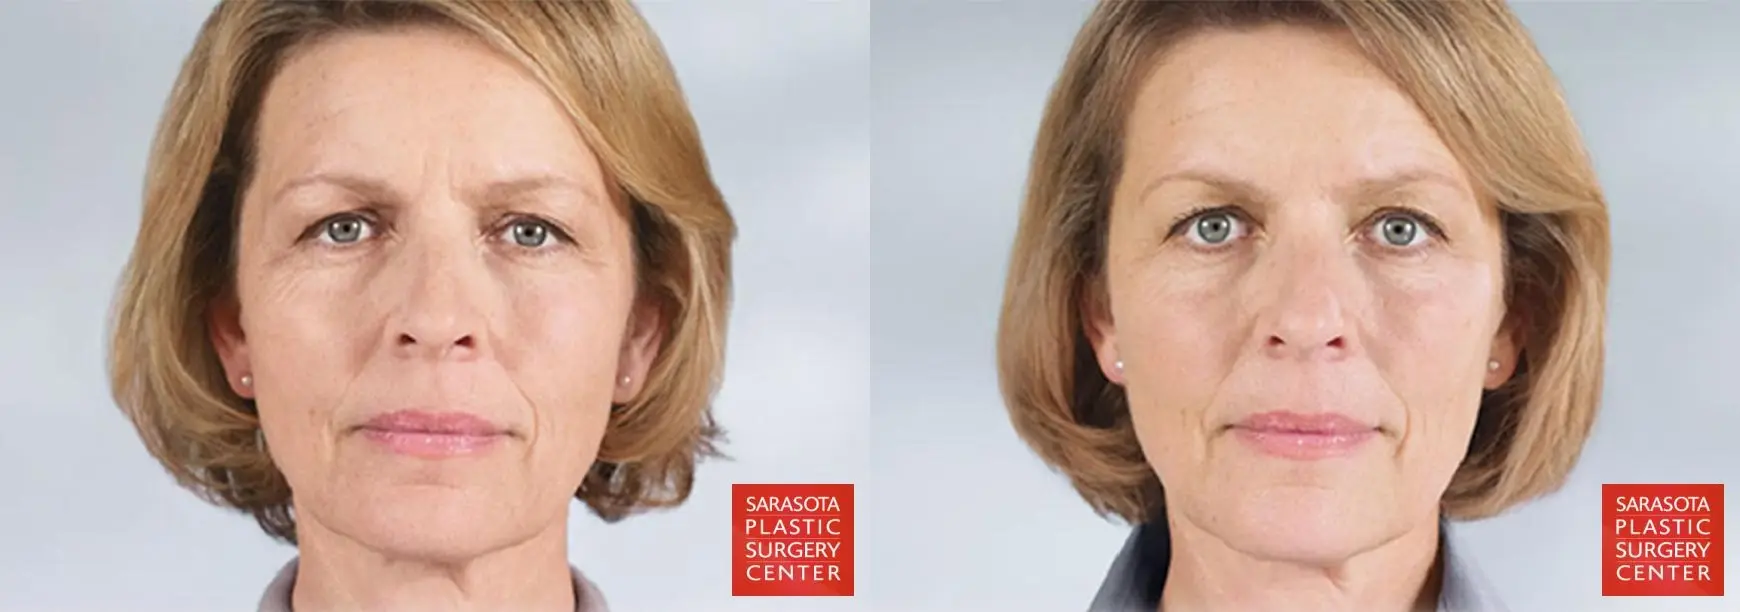 Sculptra®: Patient 1 - Before and After 1